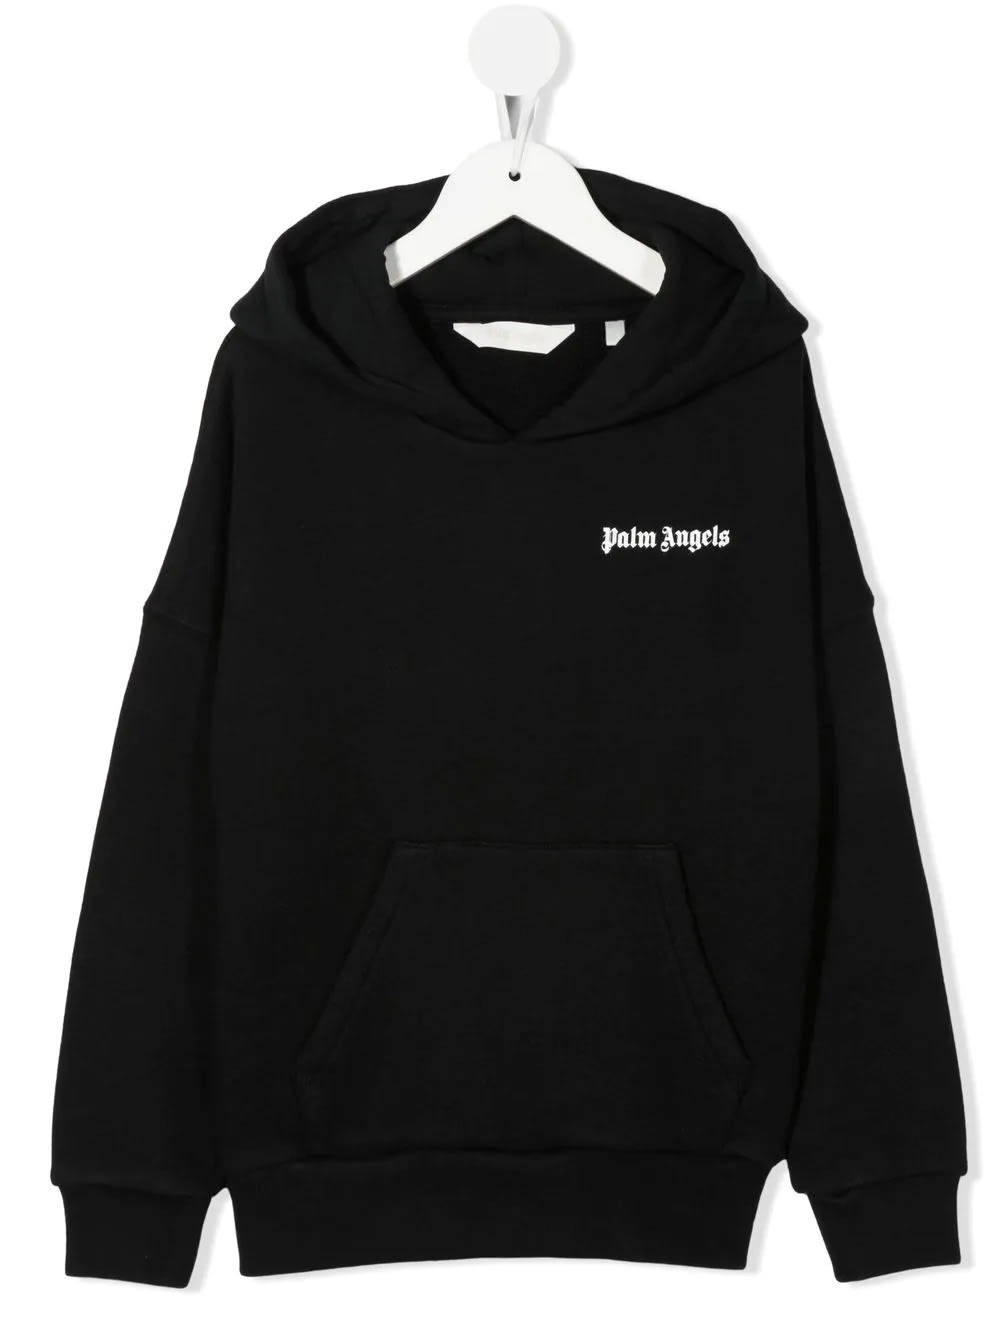 Palm Angels Kids Black Sweatshirt With Front And Back Logo